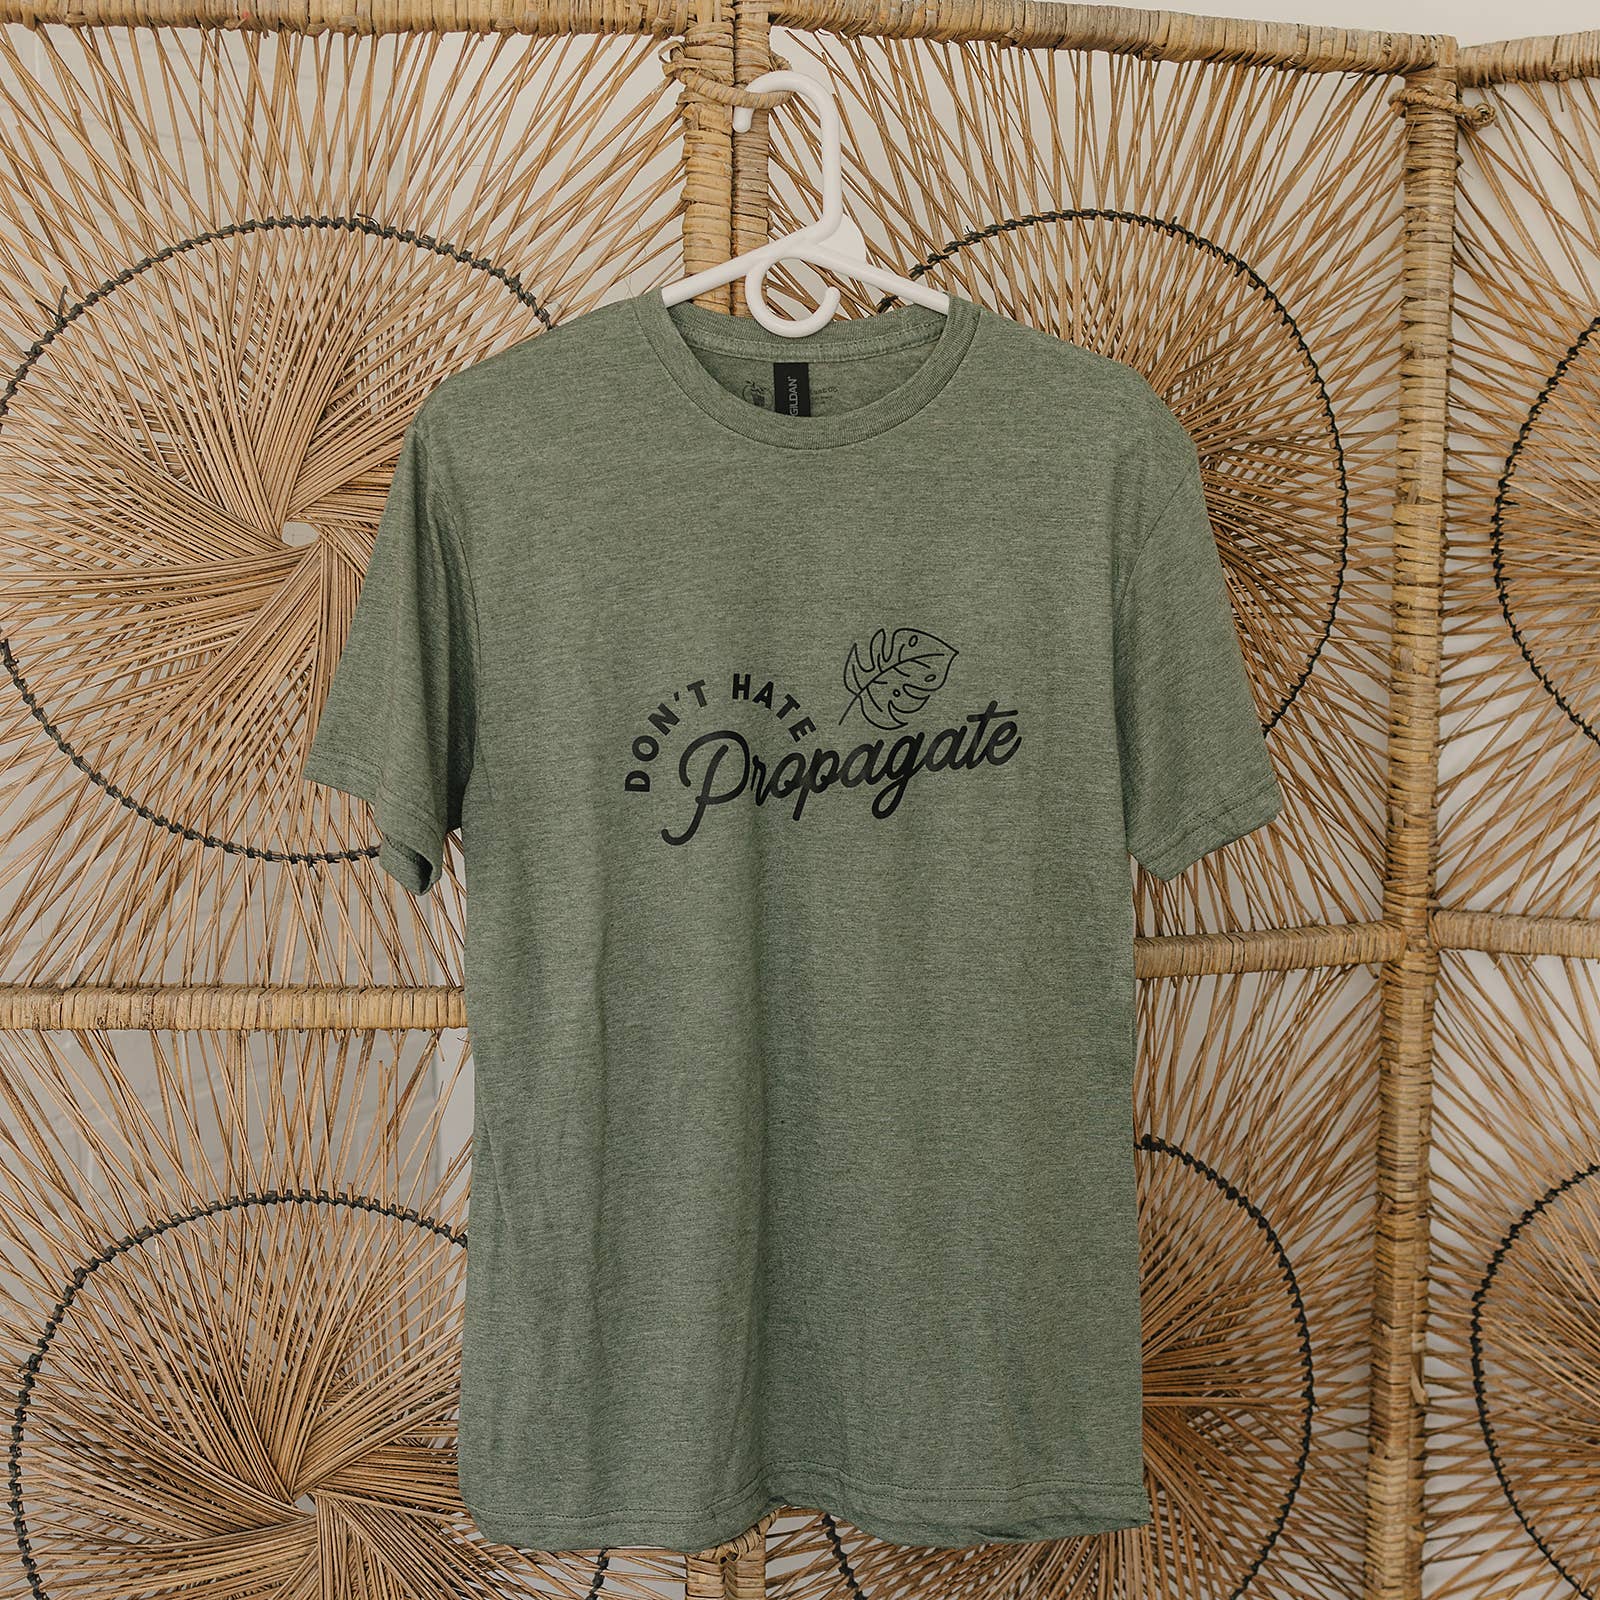 Packer Plant Co - "Don't Hate, Propagate" Plant Themed Graphic T-Shirt: Small / Heather Military Green